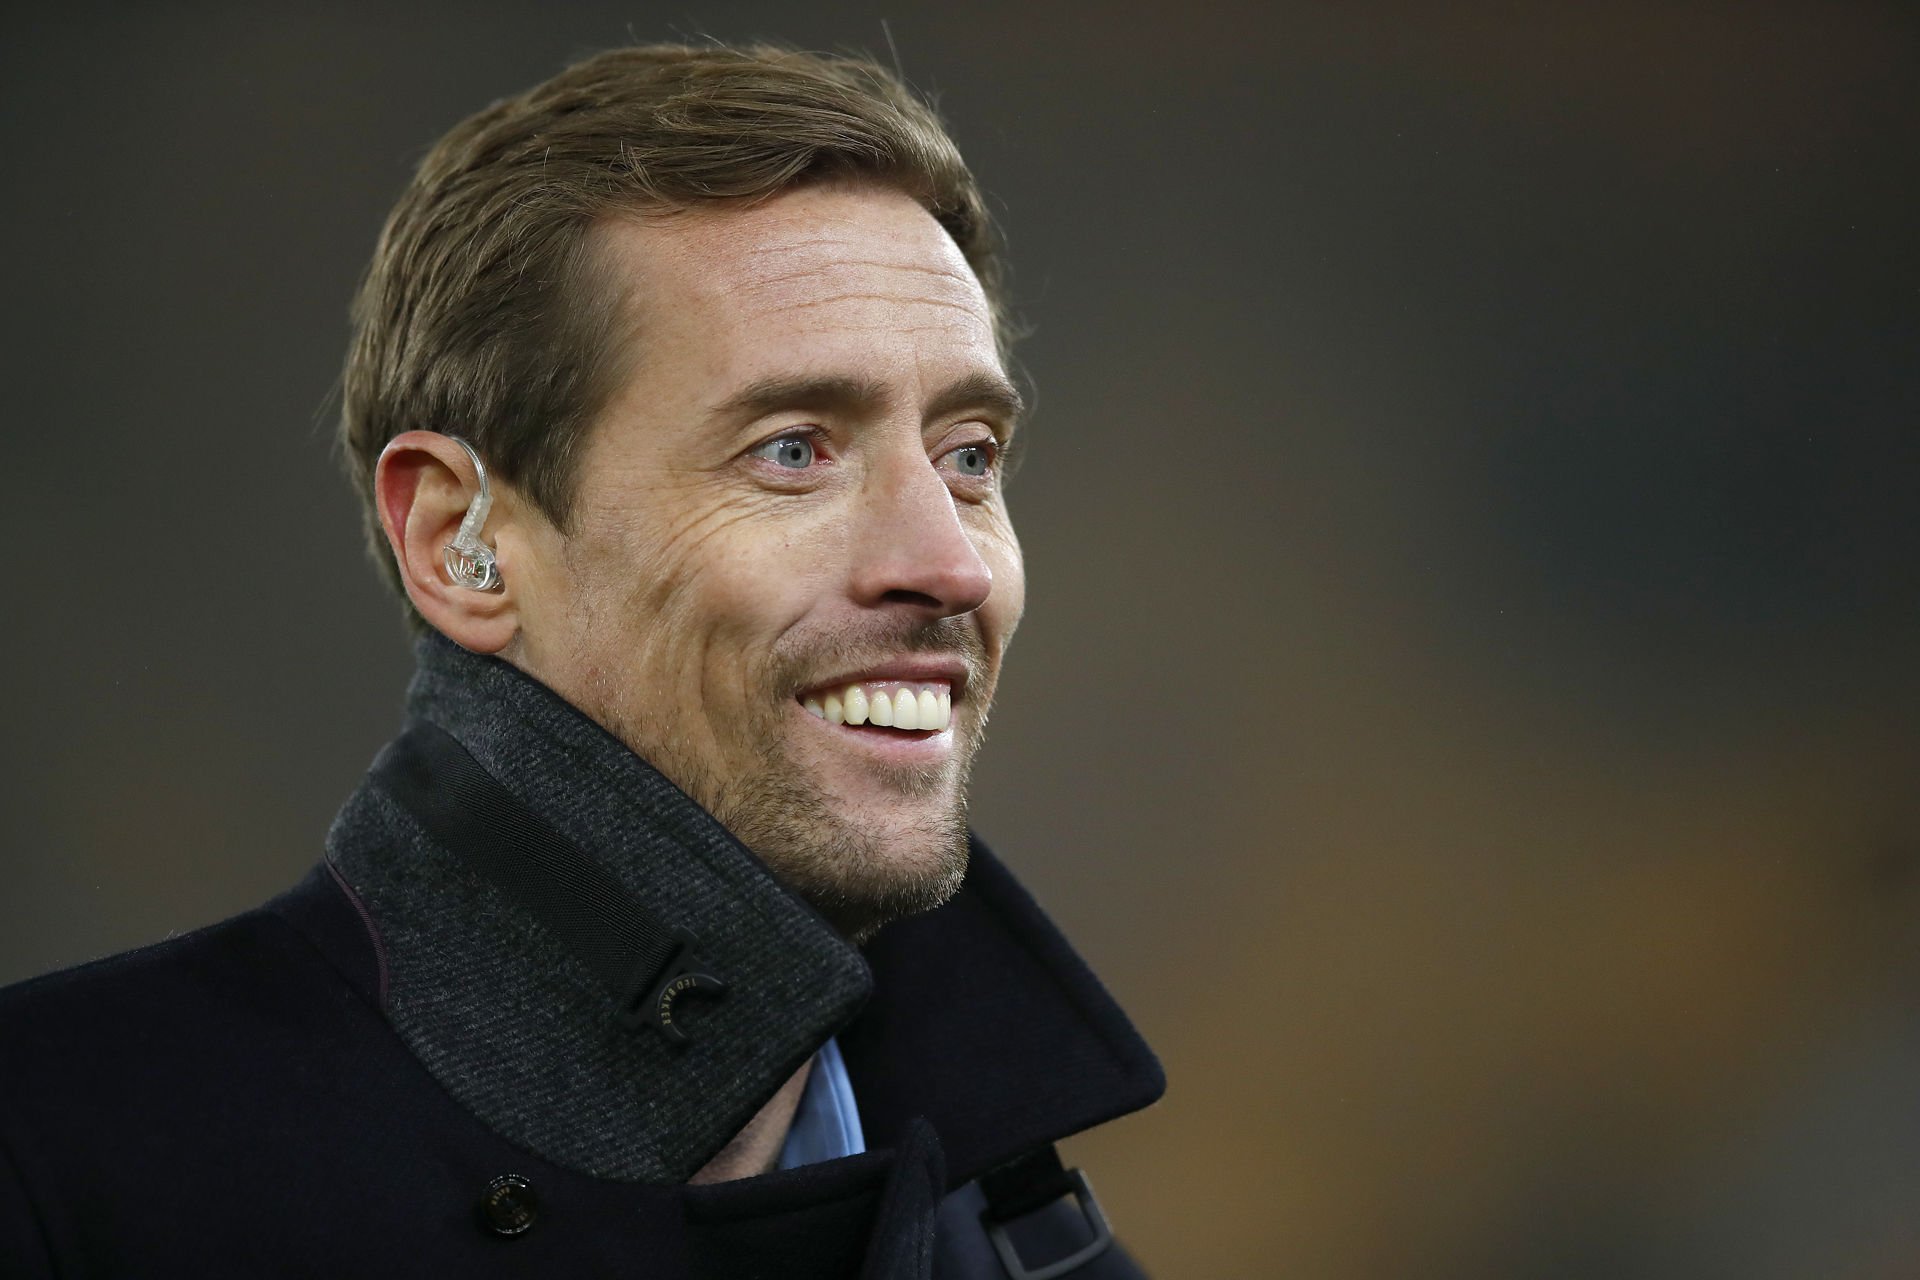 ‘It has to be one of them’ – Peter Crouch discusses who should be named Premier League Player of the Year and claims three Liverpool stars should be in contention